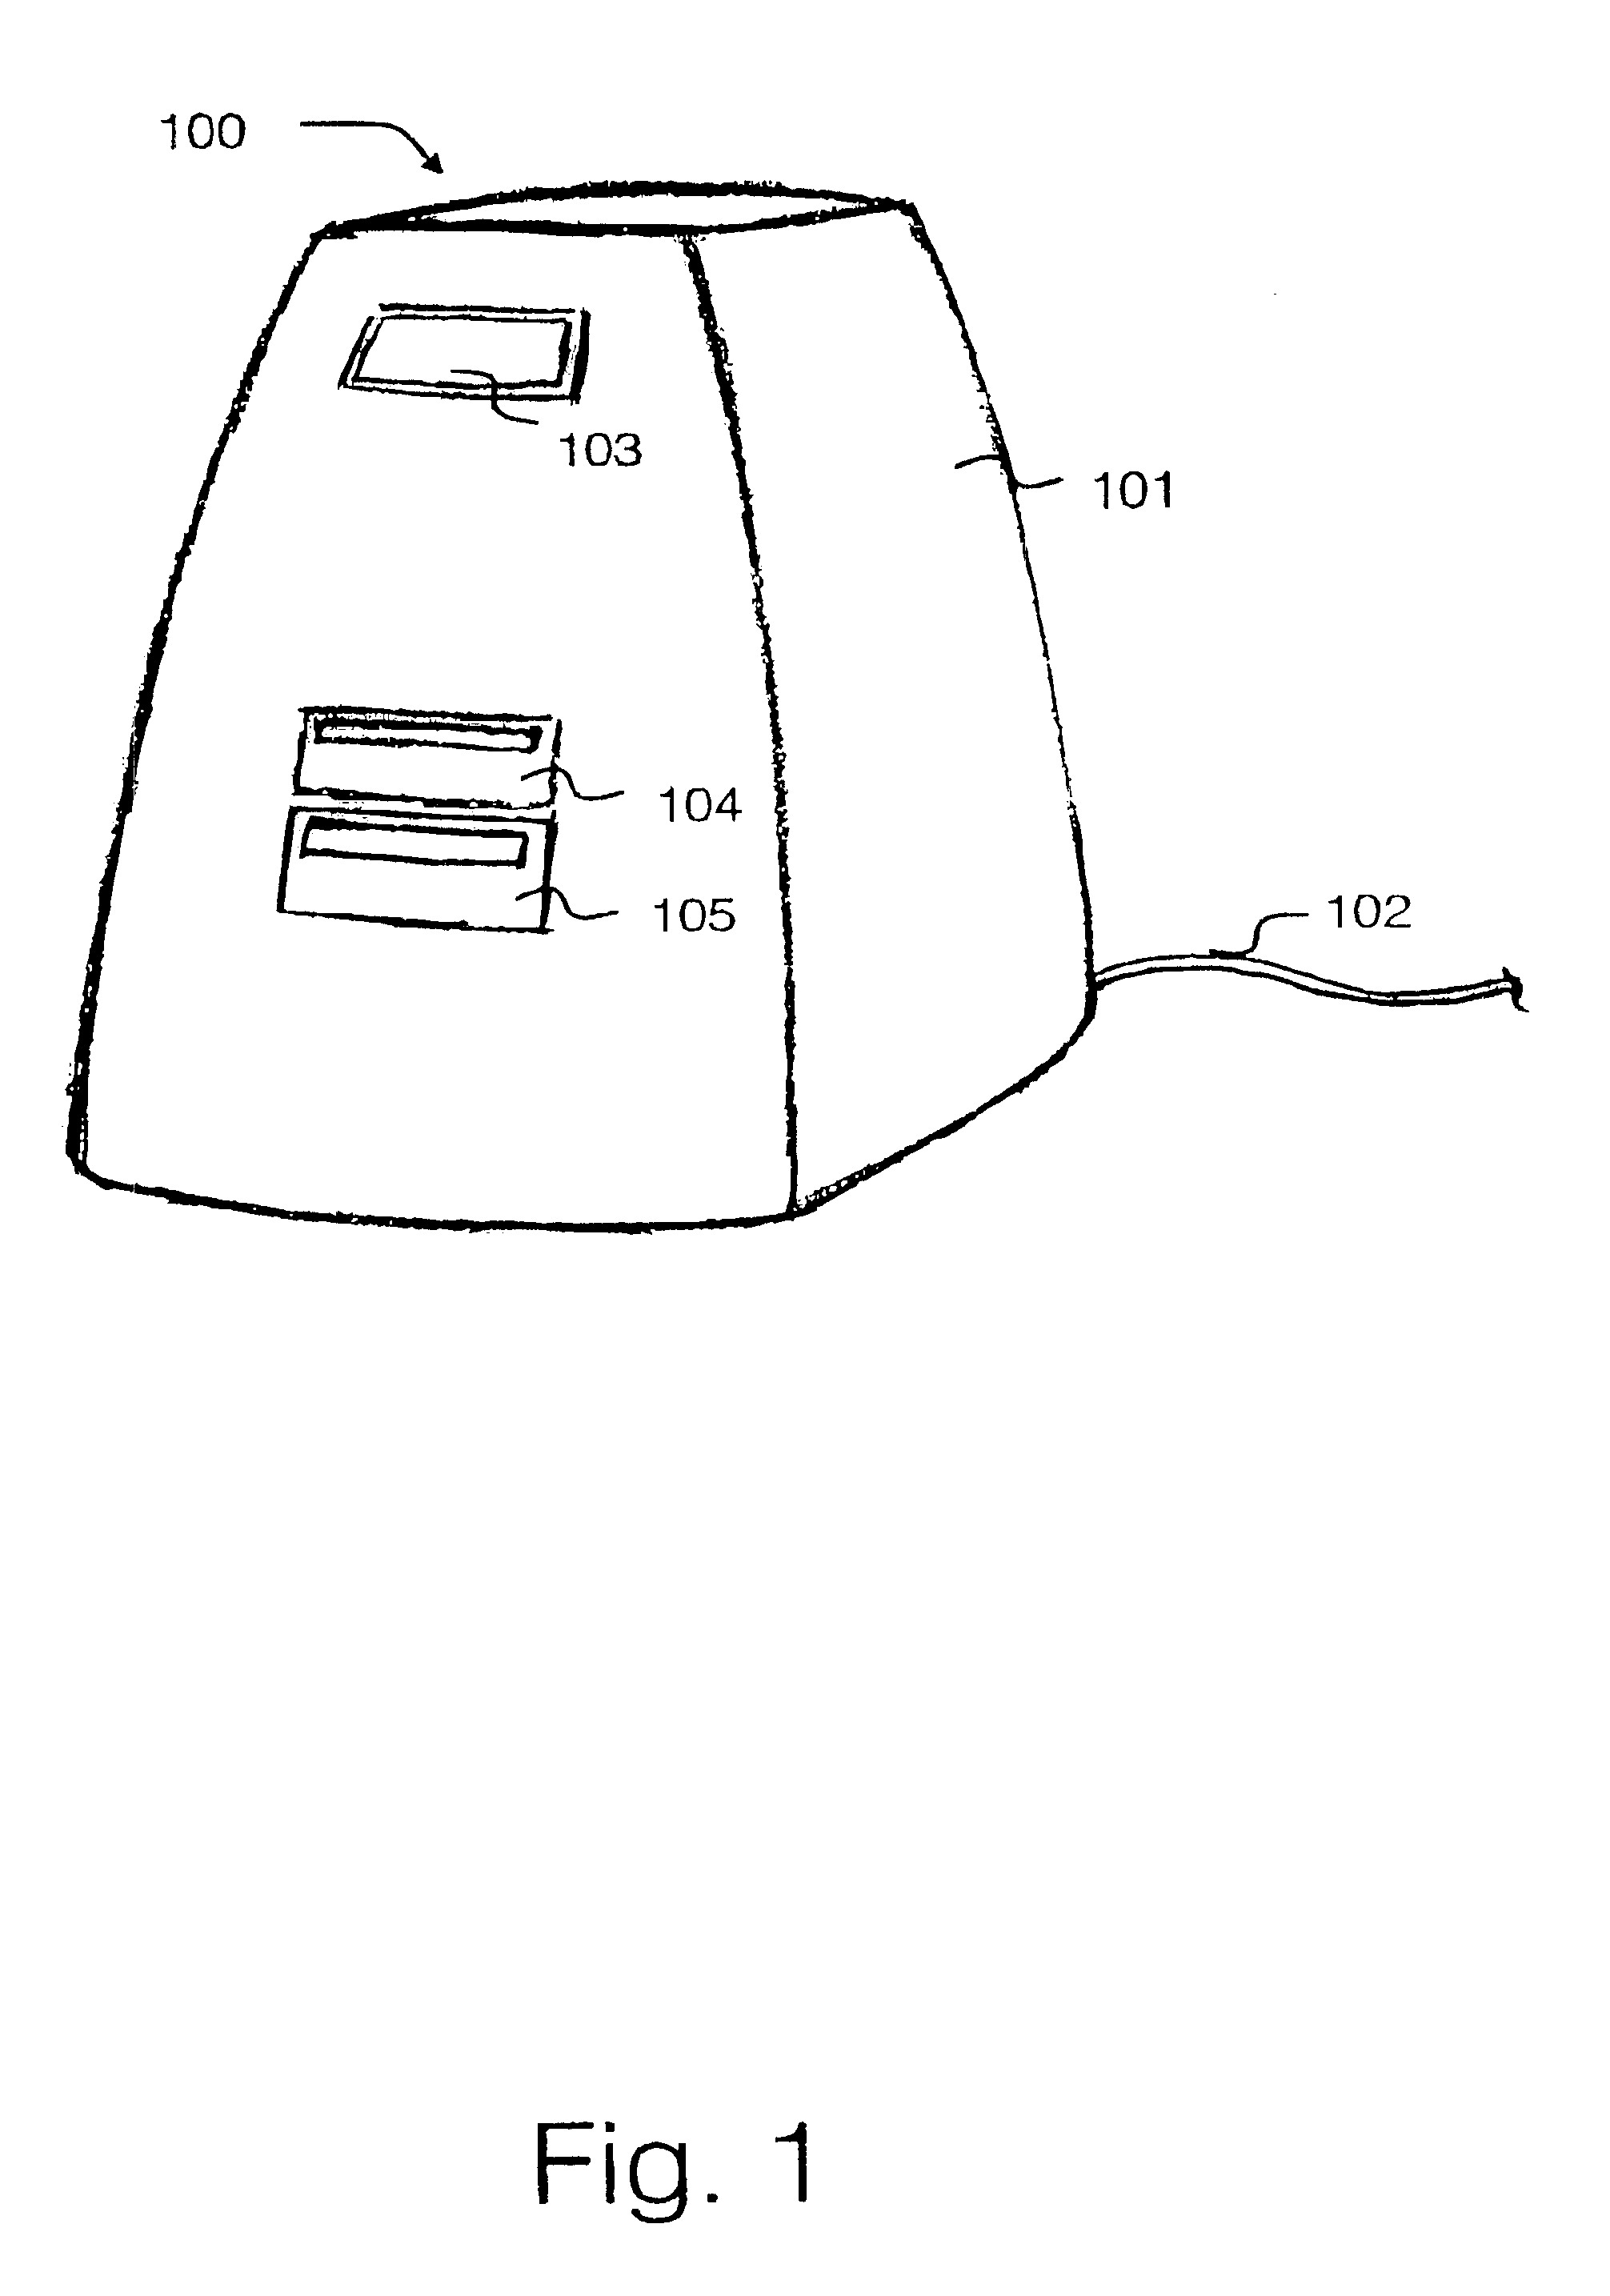 Computer apparatus, method and memory including license key